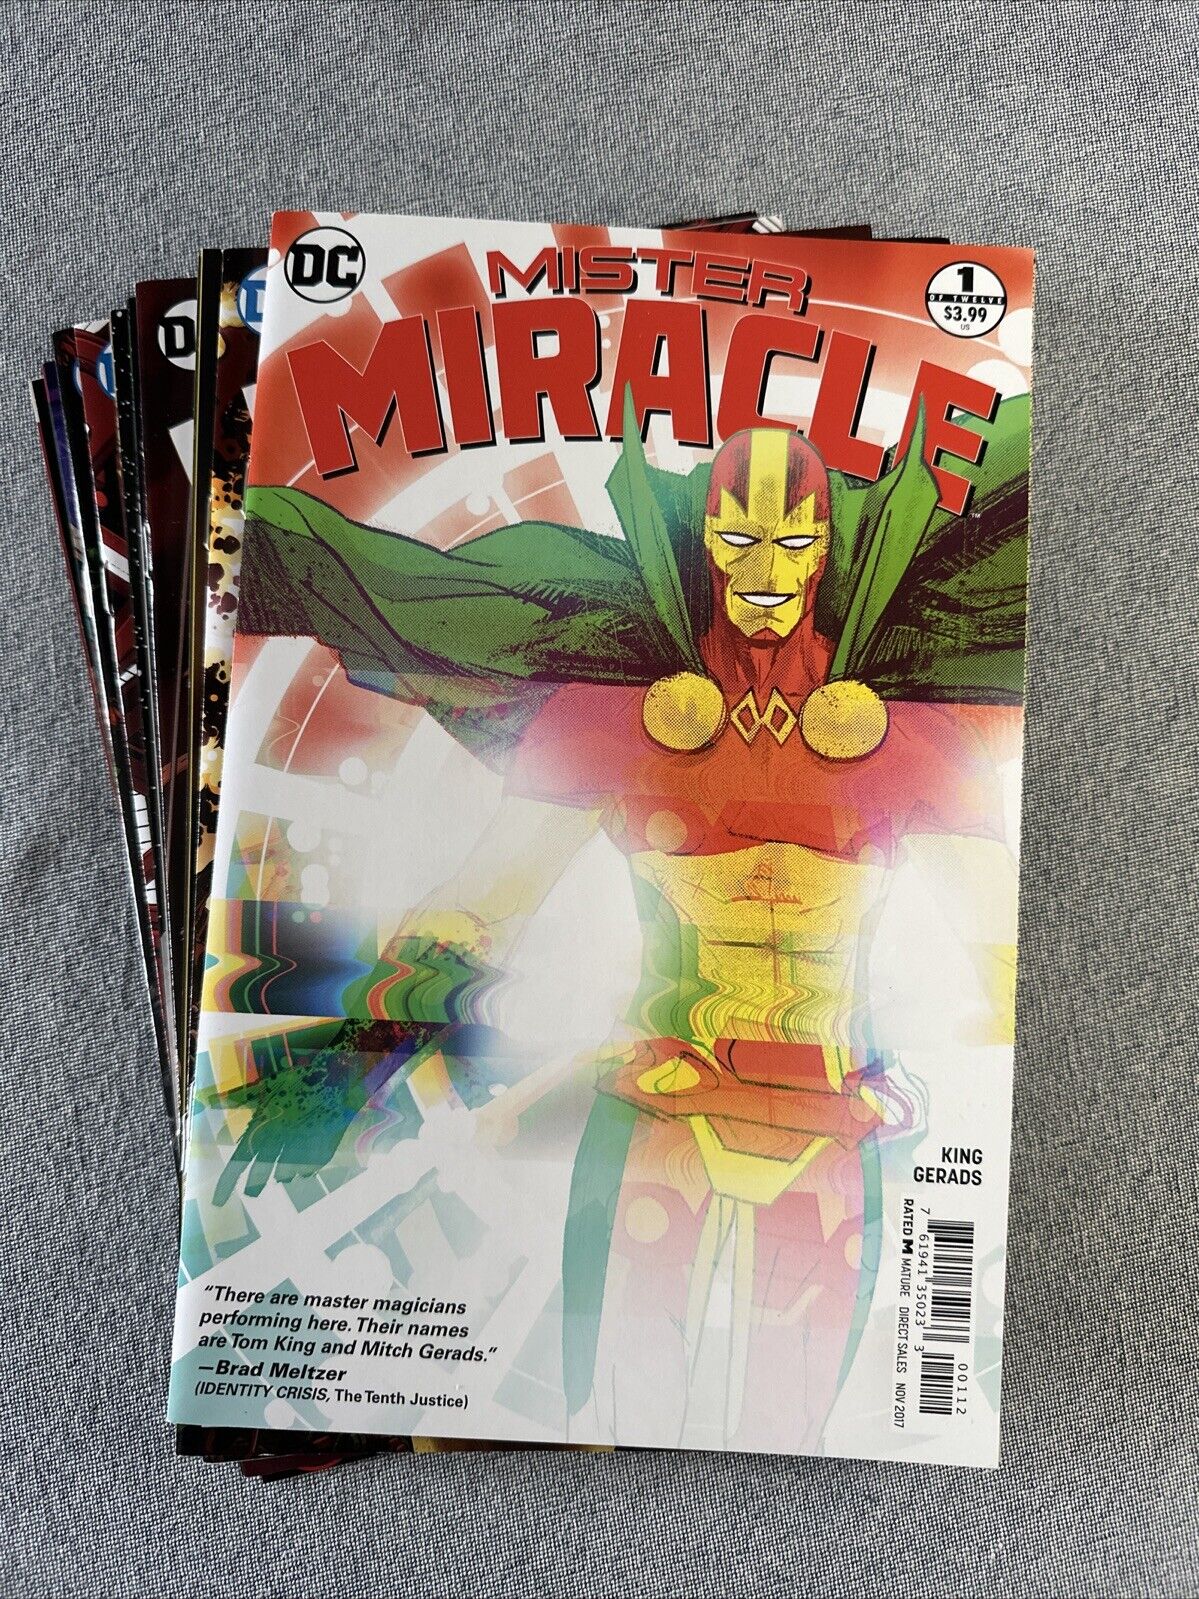 Mister Miracle #1-12 Lot By Tom King And Mitch Gerads Complete DC 2017 series